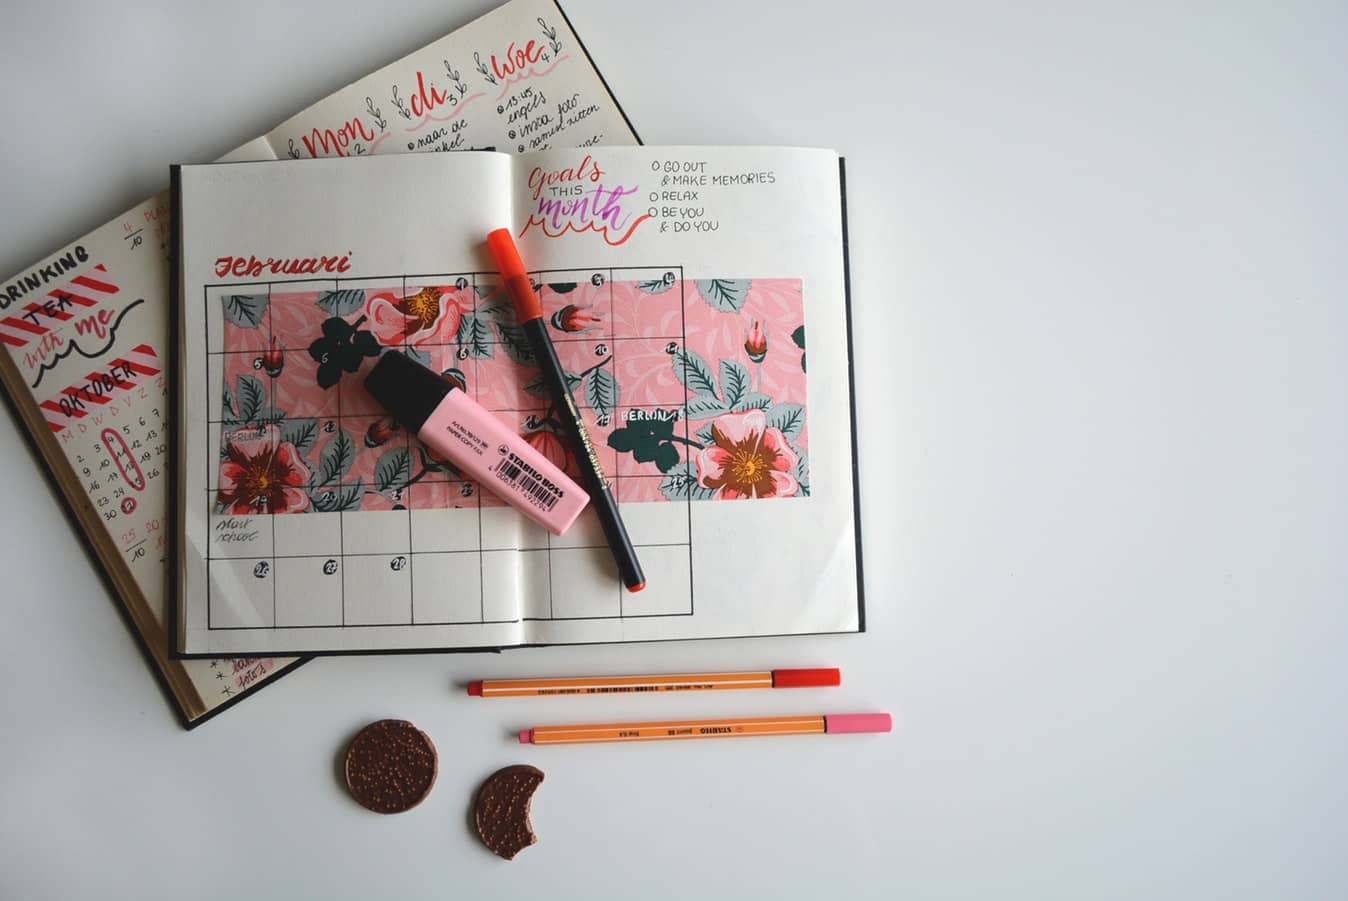 A goal calender open on top of a daily planner with a highlighter and pencils